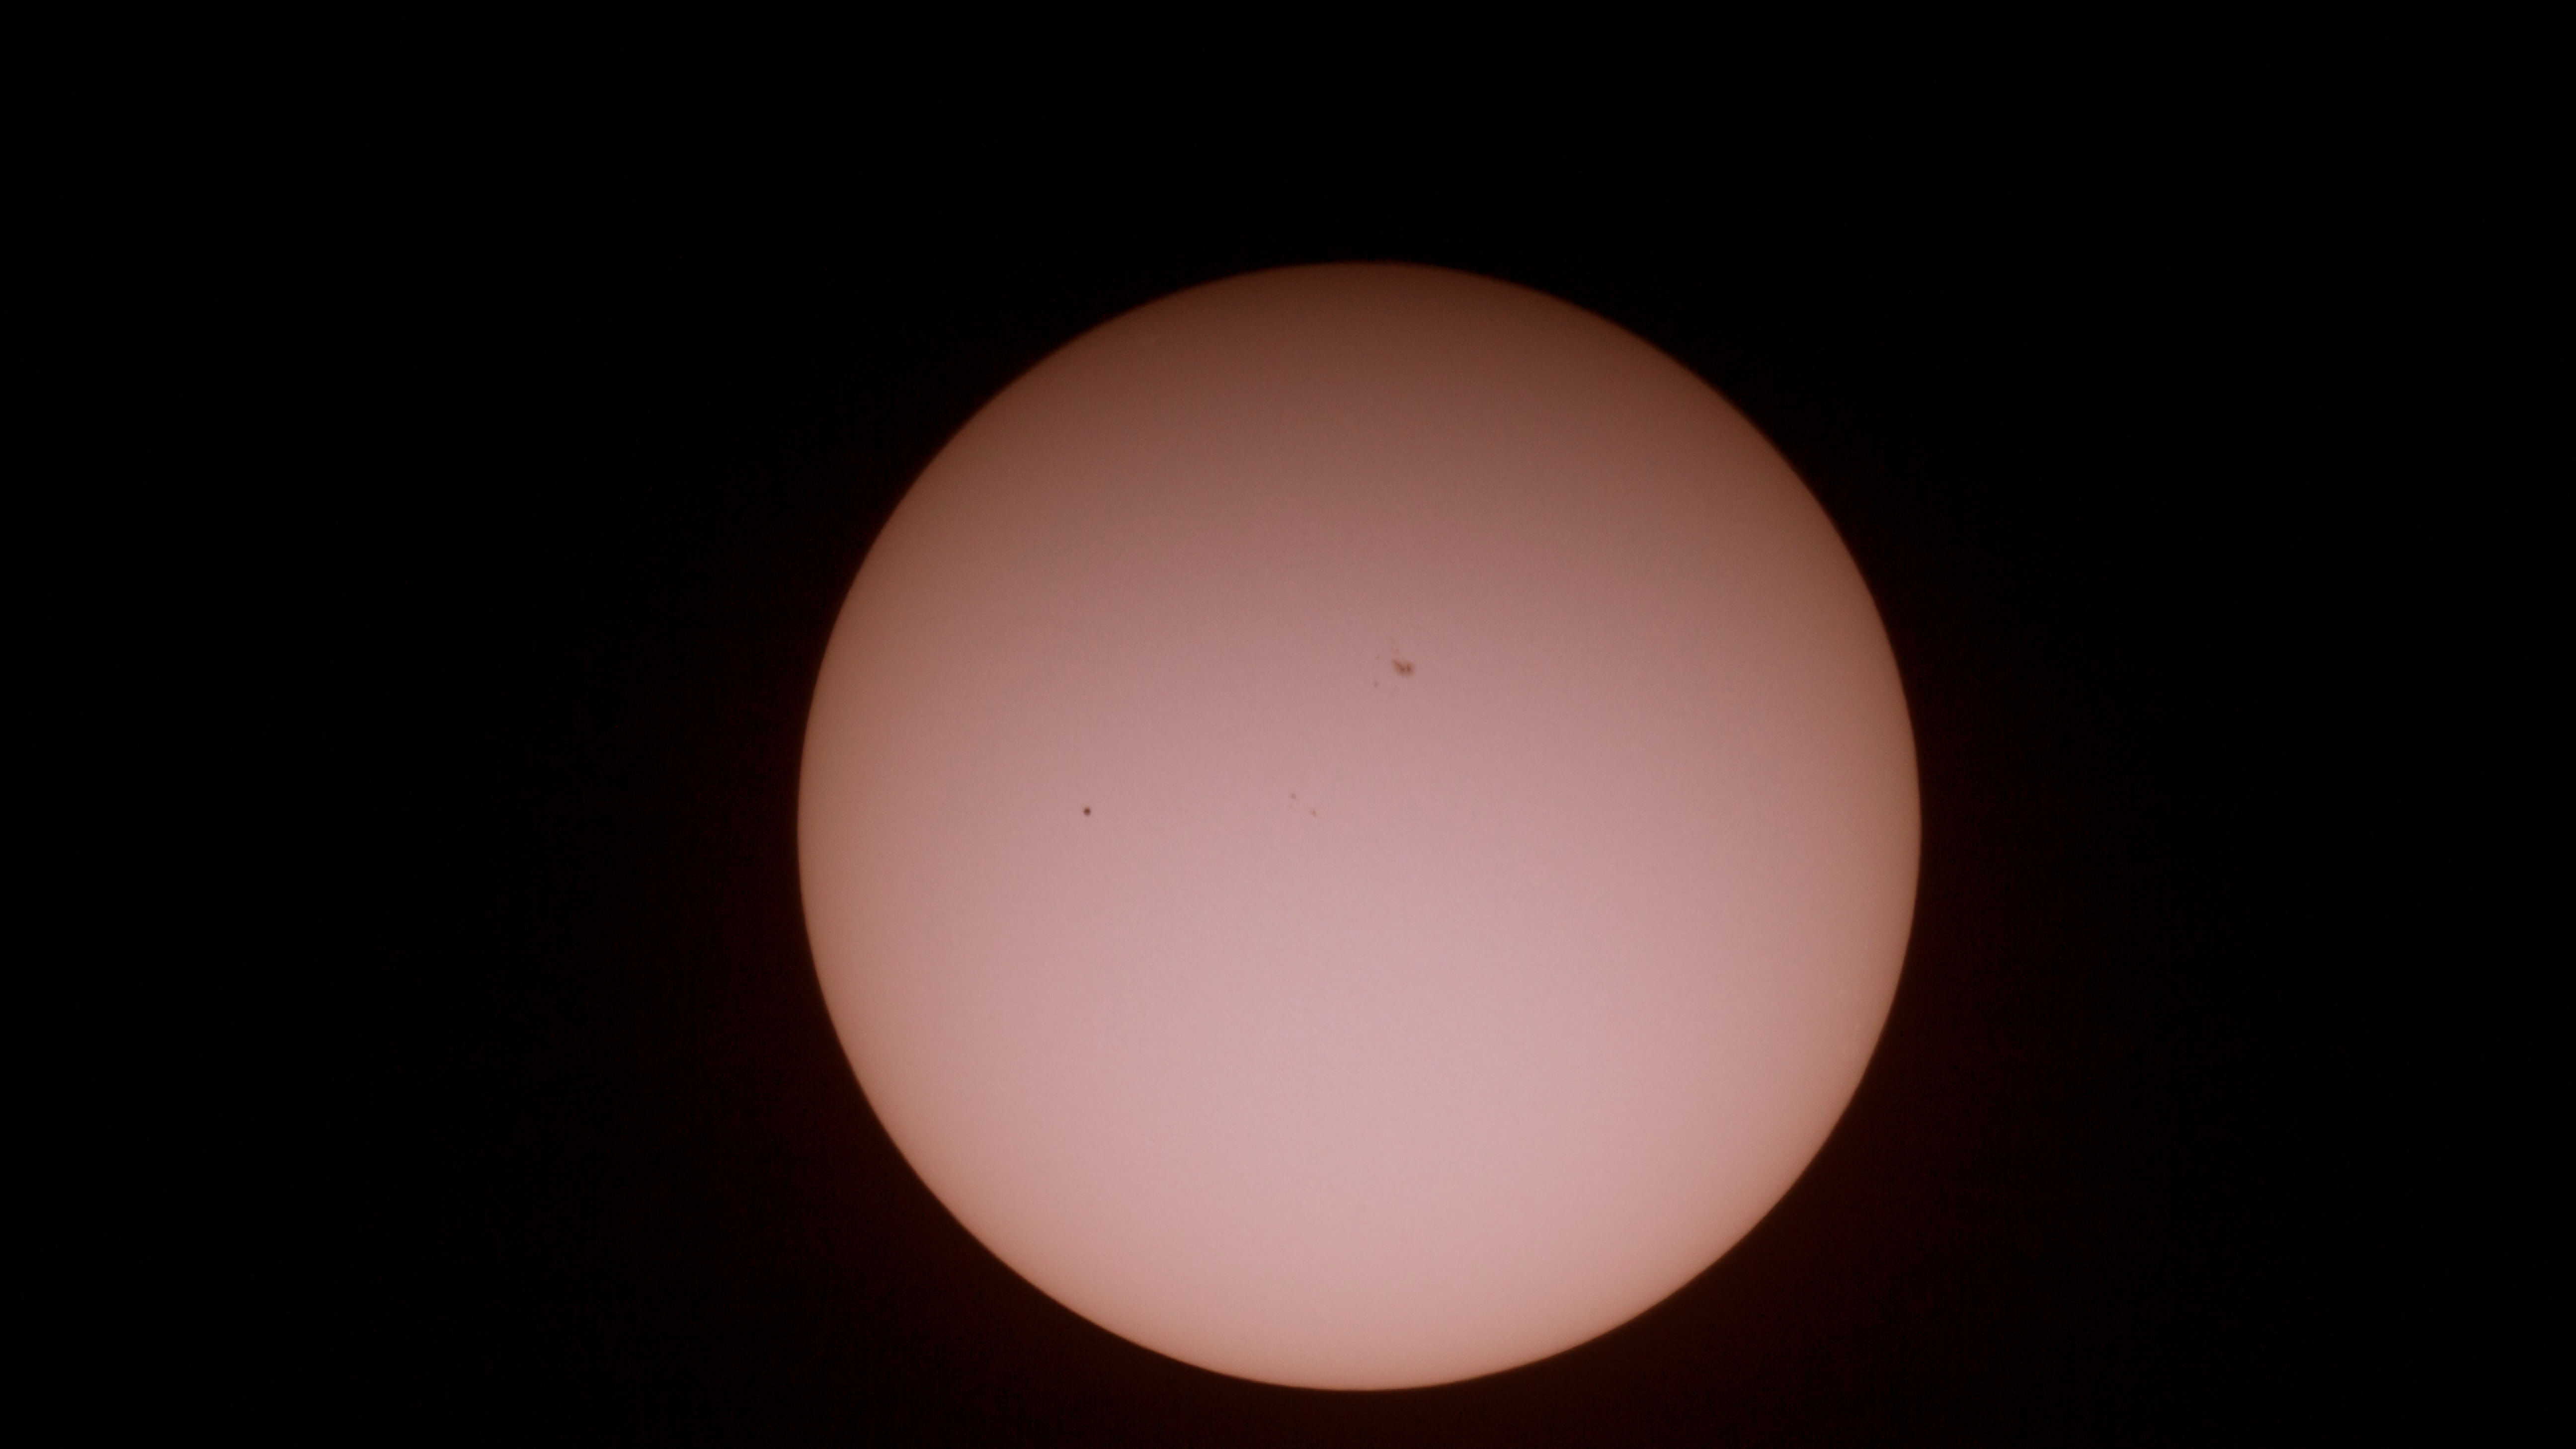 Mercury transit of the sun 9th May 2016 By Tony Hayes. Taken throught a Celestron 6" SCT with a focal reducer/flattener. With a white light filter and colour enhanced